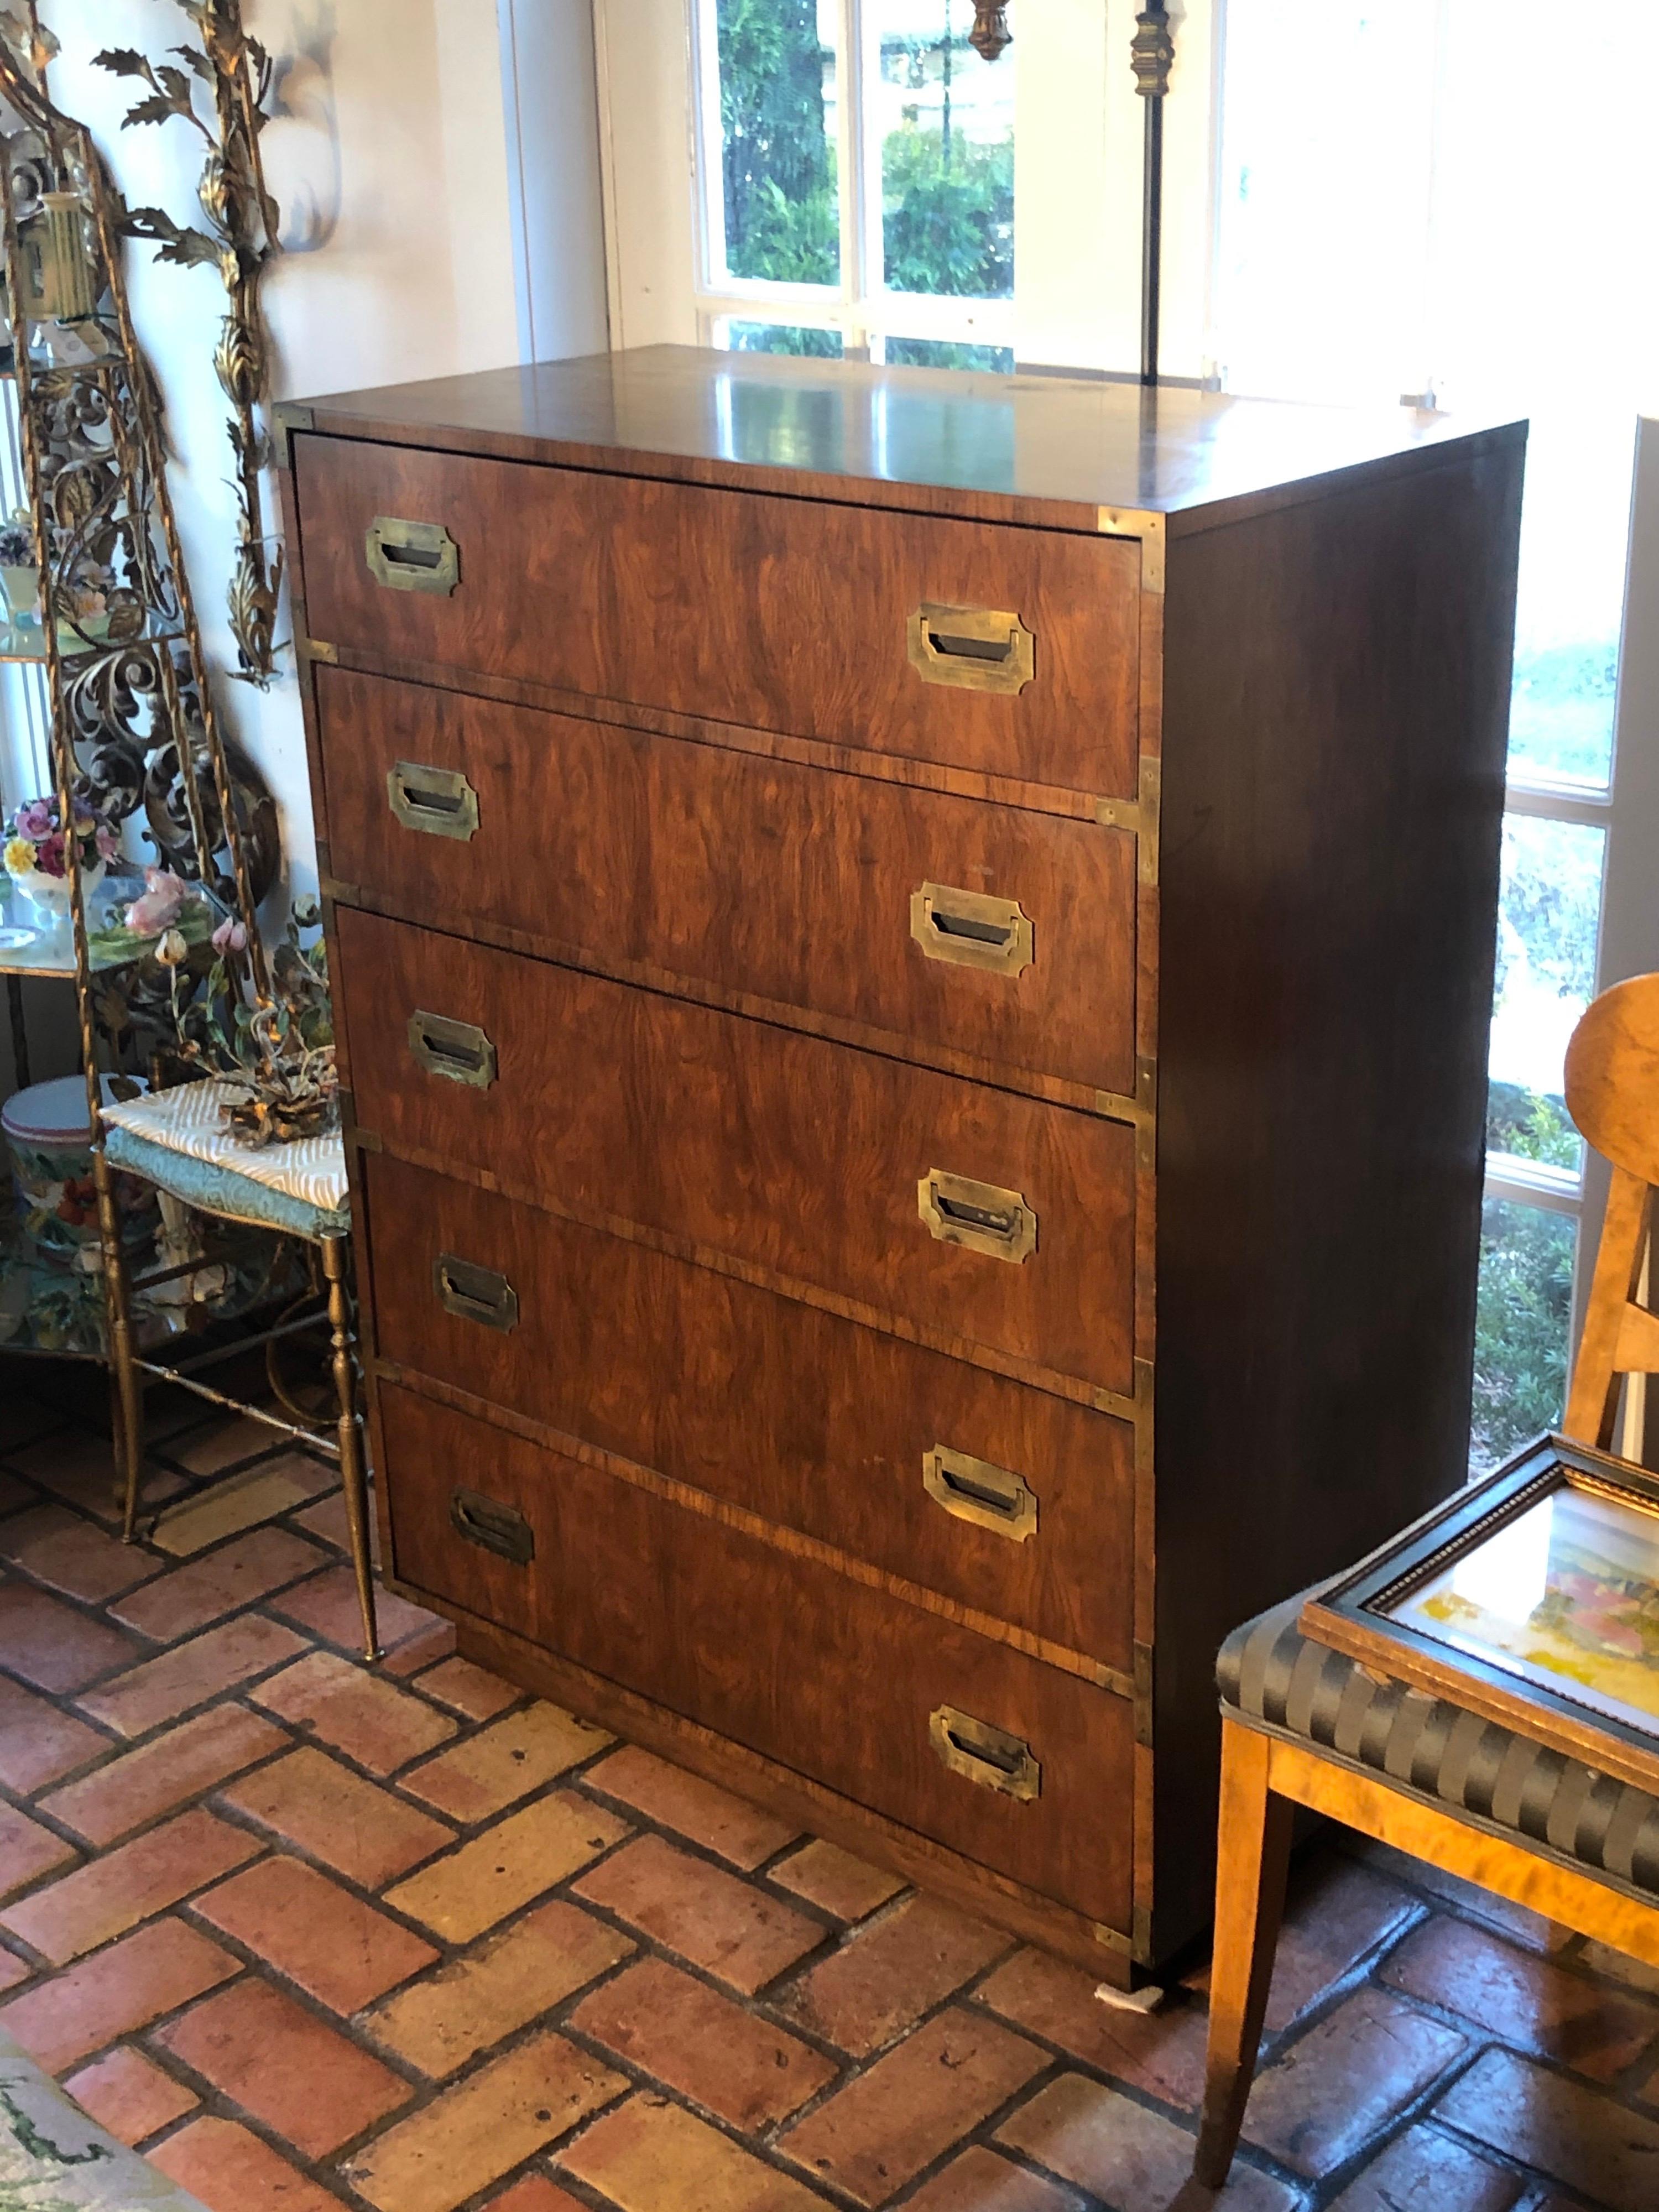 Campaign highboy chest of drawers by Dixie. Classic brass hardware and nice burl wood style wood. Five dovetailed drawers for ample storage with a platform base typical of the Mod 1970s.